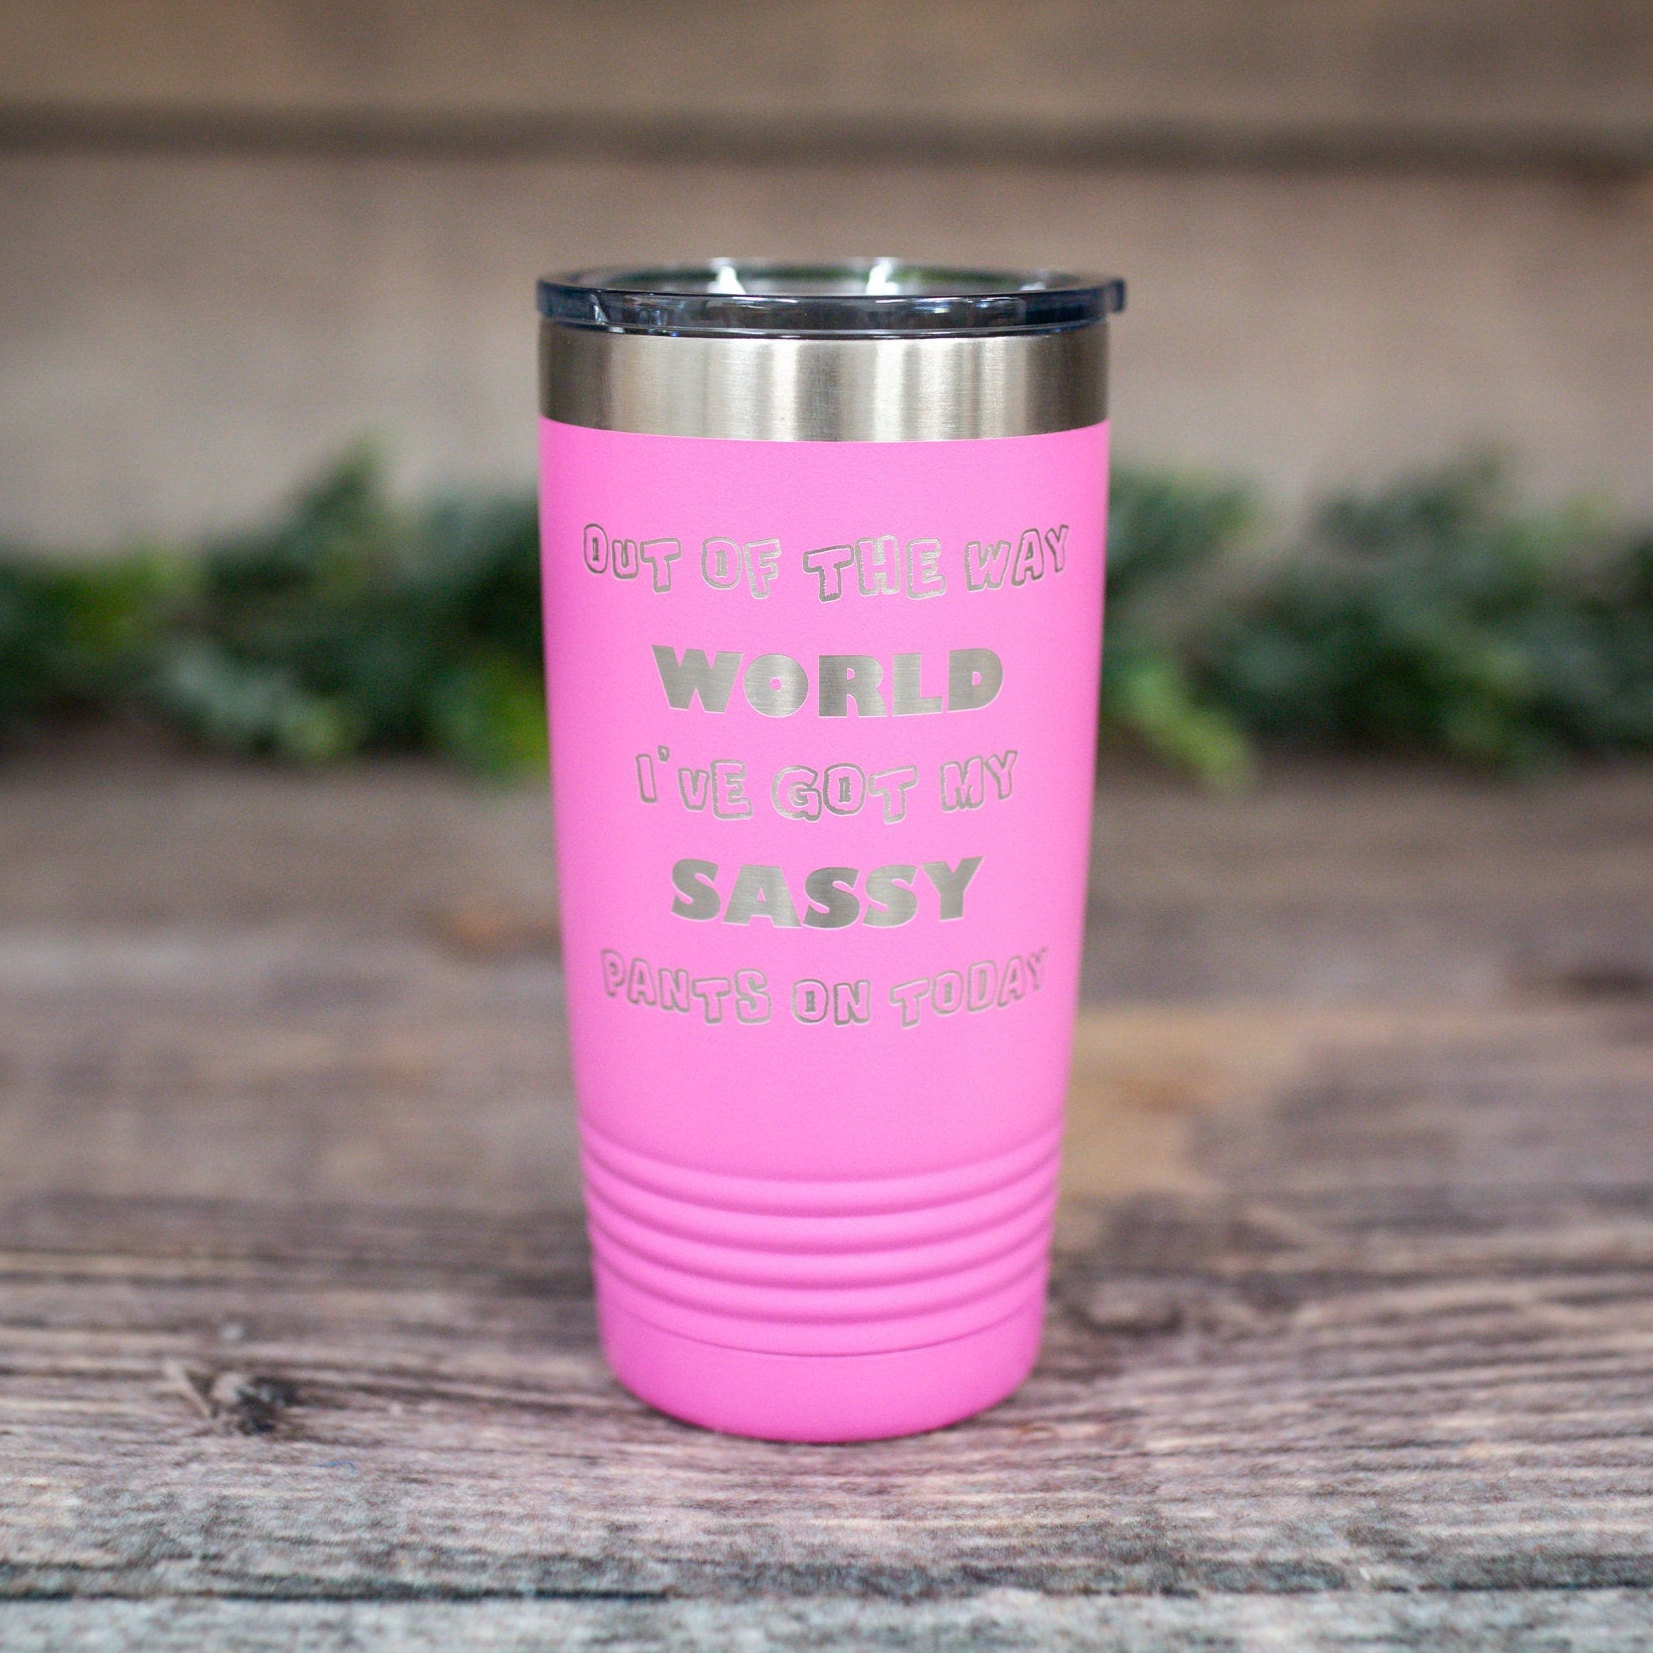 https://3cetching.com/wp-content/uploads/2021/07/out-of-the-way-world-ive-got-my-sassy-pants-on-today-engraved-tumbler-funny-gift-for-her-sassy-gift-mug-for-her-60f72996.jpg